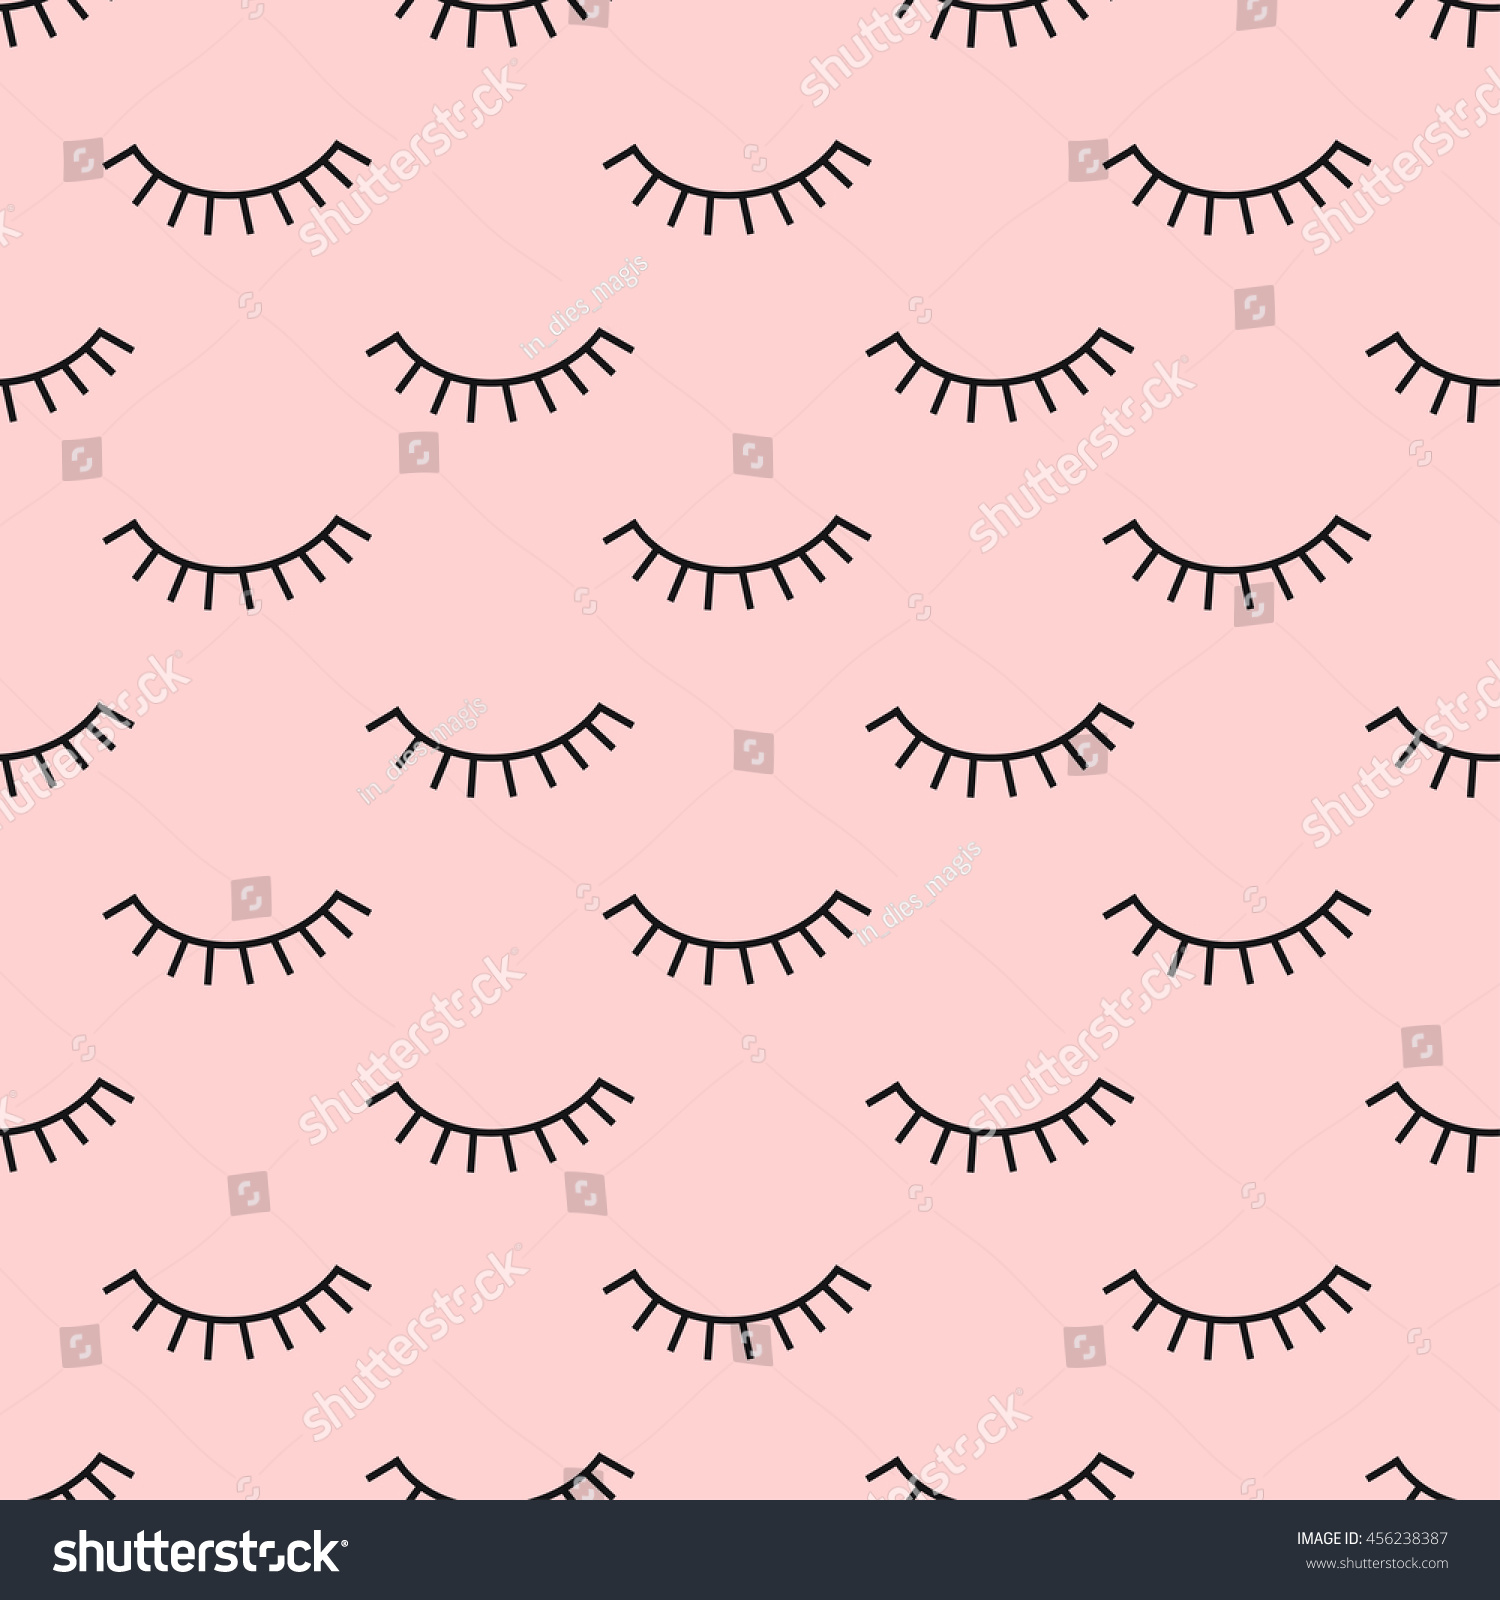 SVG of Abstract pattern with closed eyes on pink background. Cute eyelashes illustration. Fashion design for textile, wallpaper, fabric. svg